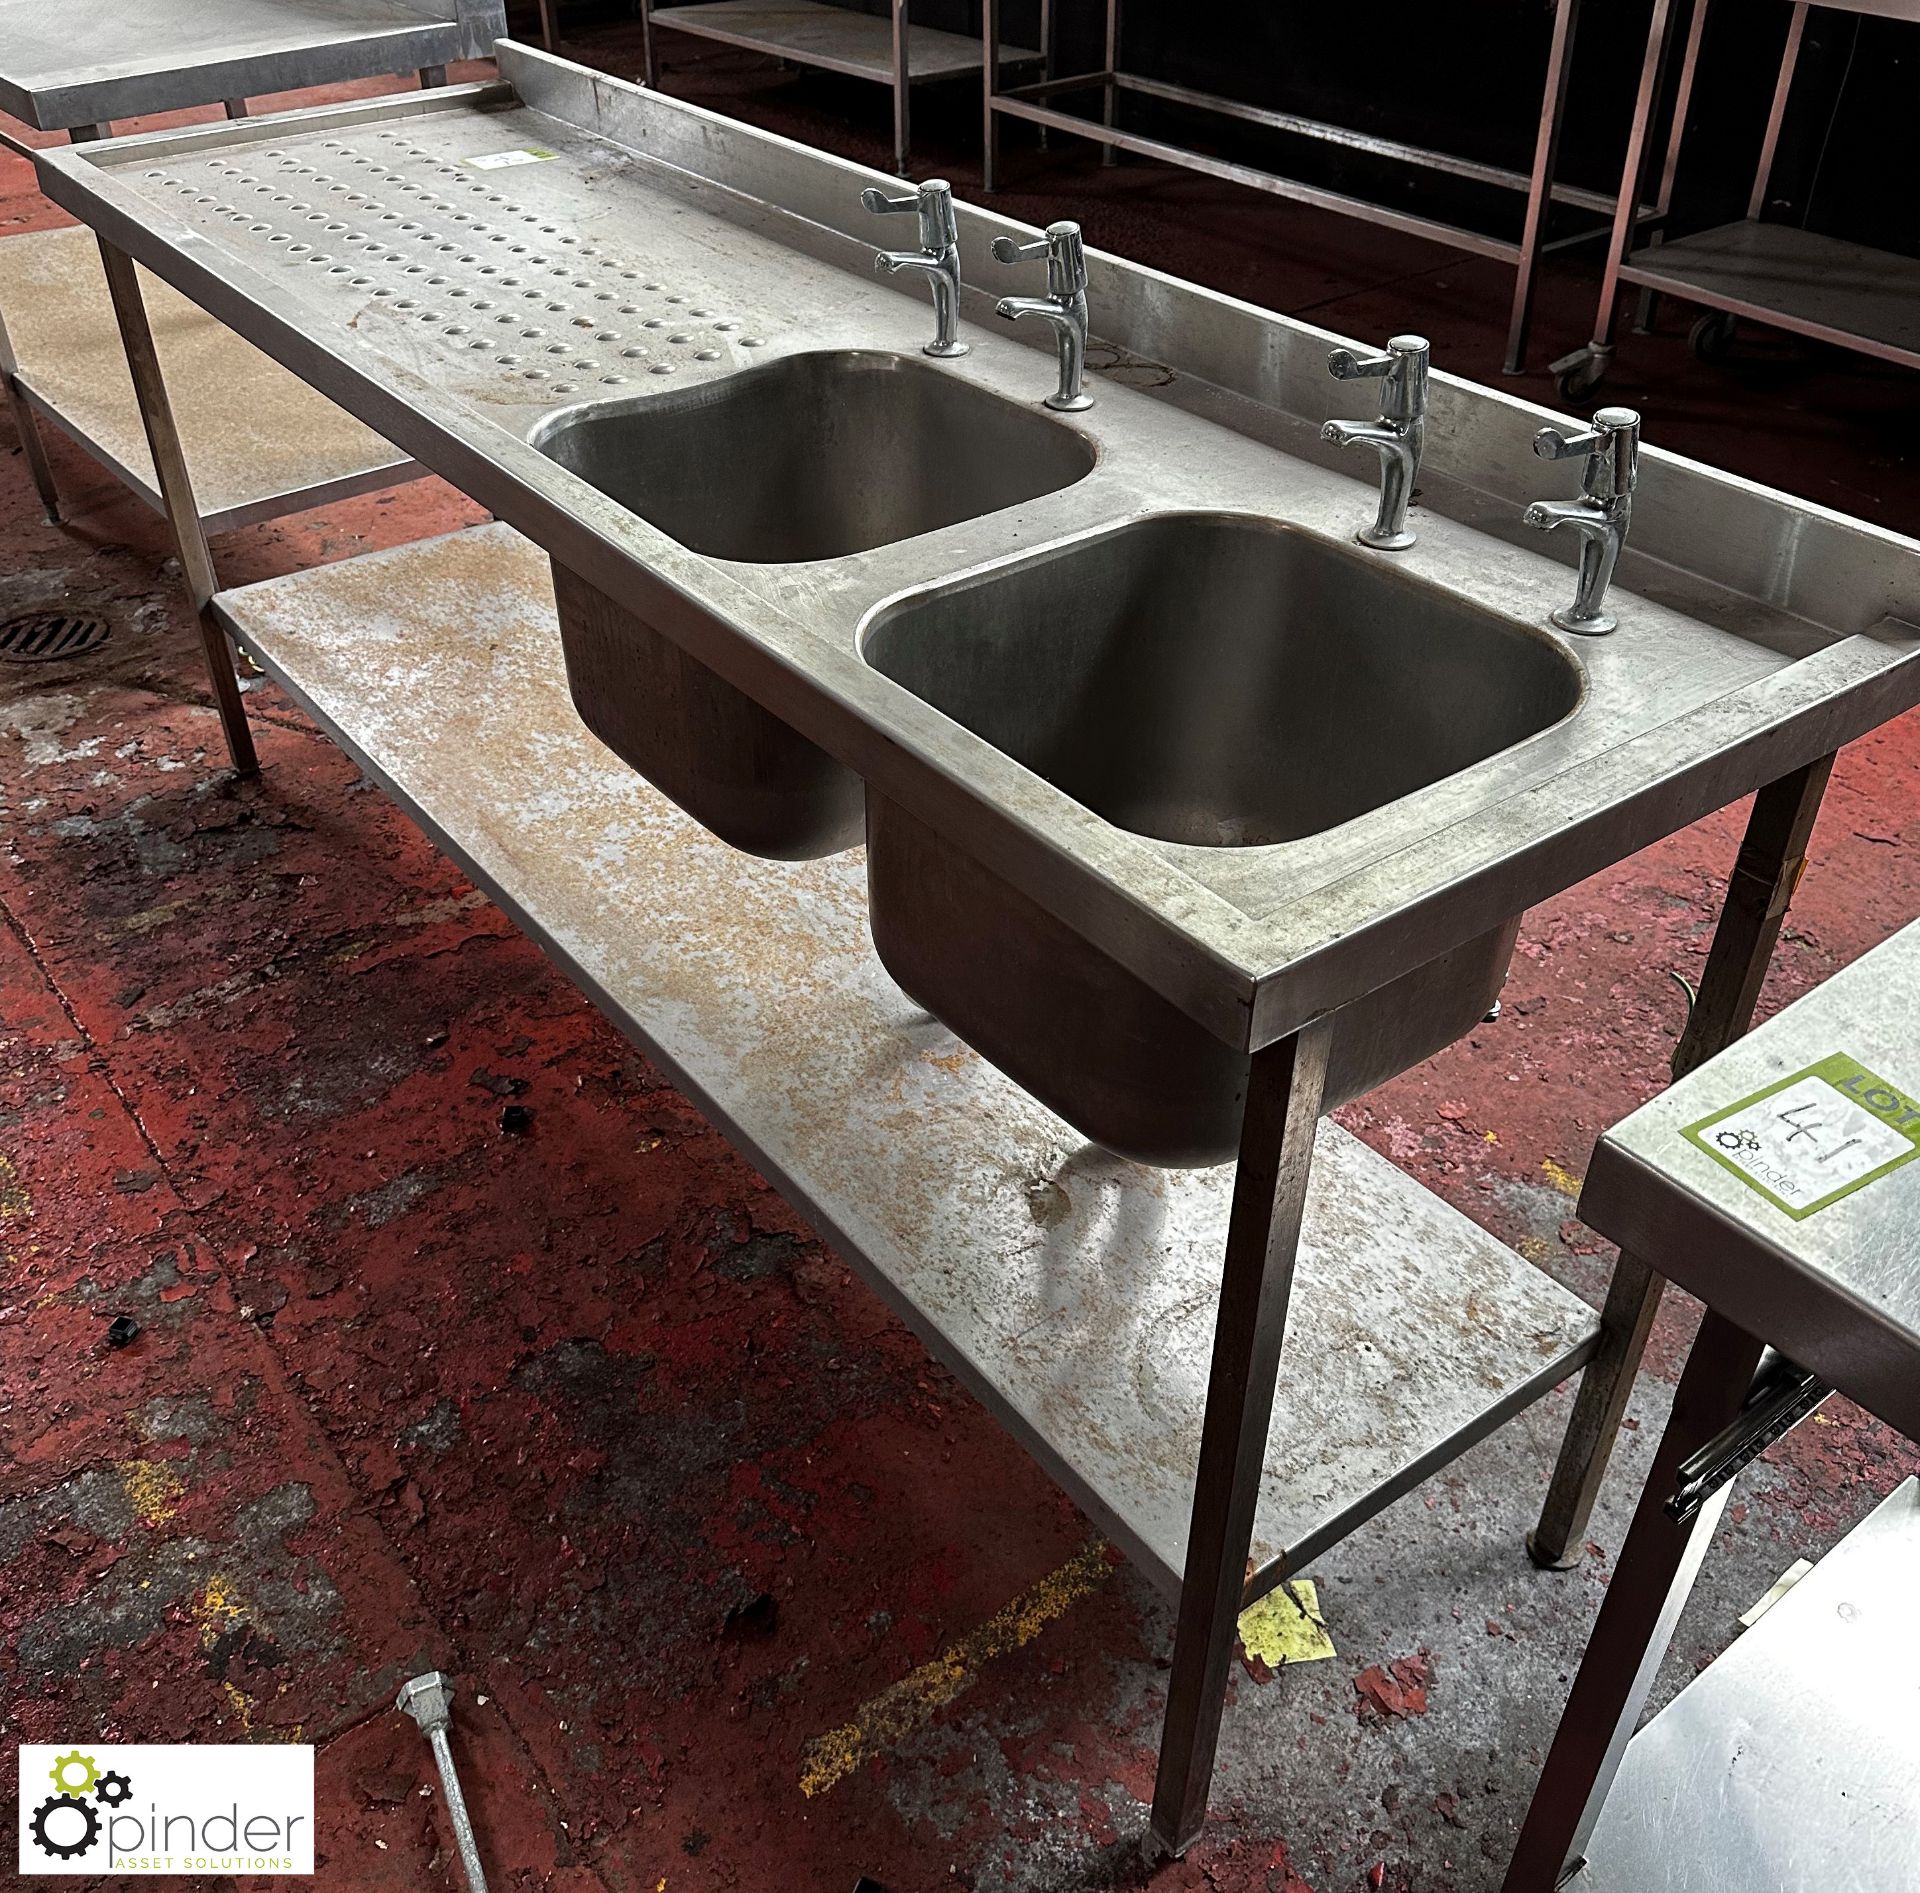 Stainless steel twin bowl Sink, 2100mm x 650mm x 900mm, with left hand drainer and under shelf - Image 3 of 5